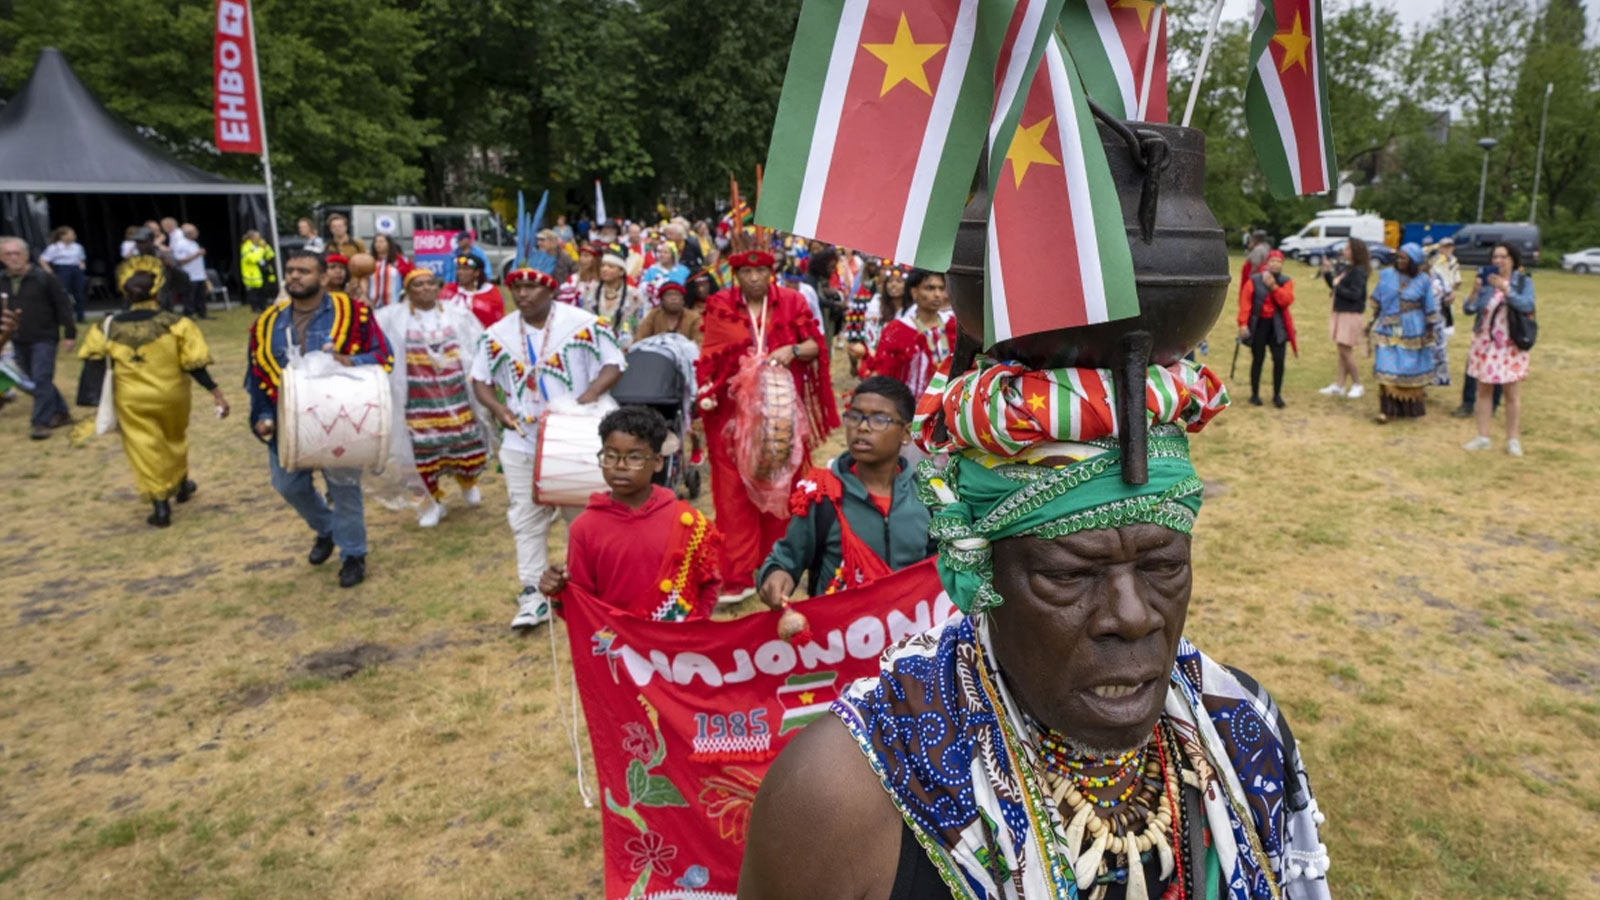 The flags of Surinam, a former Dutch colony, sit in a kettle atop the head of a man leading a procession of people attending the ceremony where Dutch King Willem-Alexander is to deliver a speech in Amsterdam, Netherlands, Saturday, July 1, 2023, at the start of a year to commemorate the 150th anniversary of abolition by the Netherlands of slavery. The king’s speech follows Dutch Prime Minister Mark Rutte saying sorry late last year for the country’s role in the slave trade and slavery.